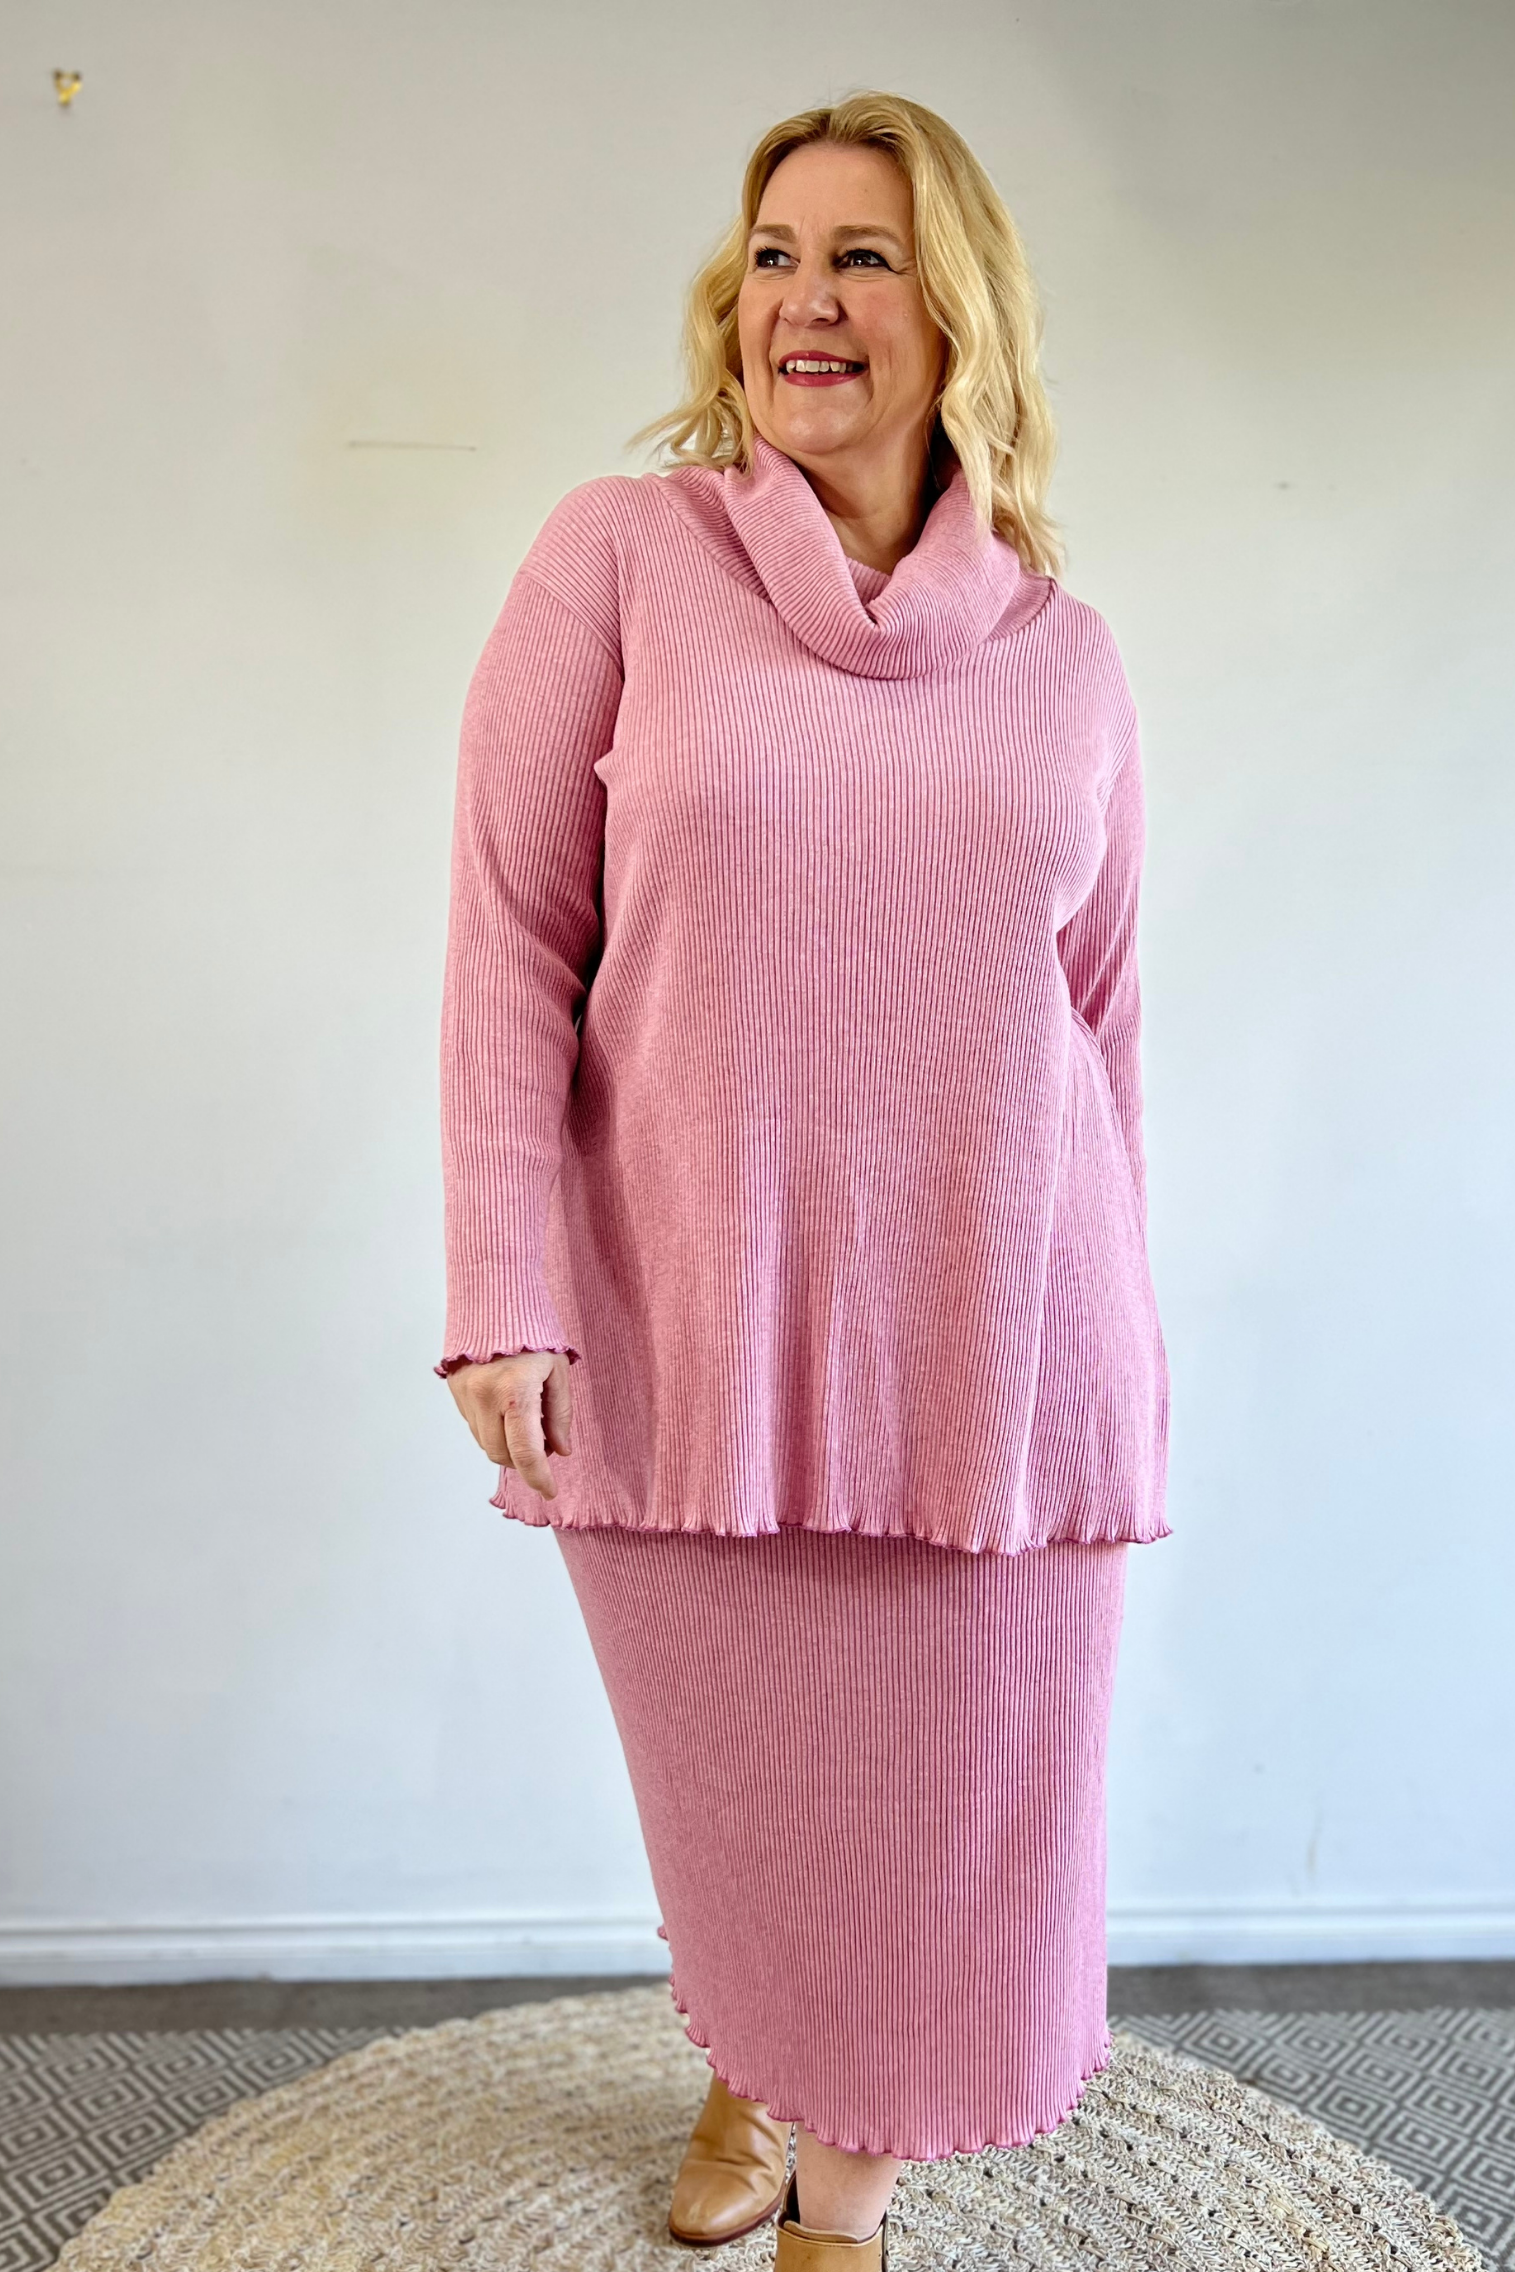 blonde kita ku model wearing a skirt in pink rib cotton with a top to match. 